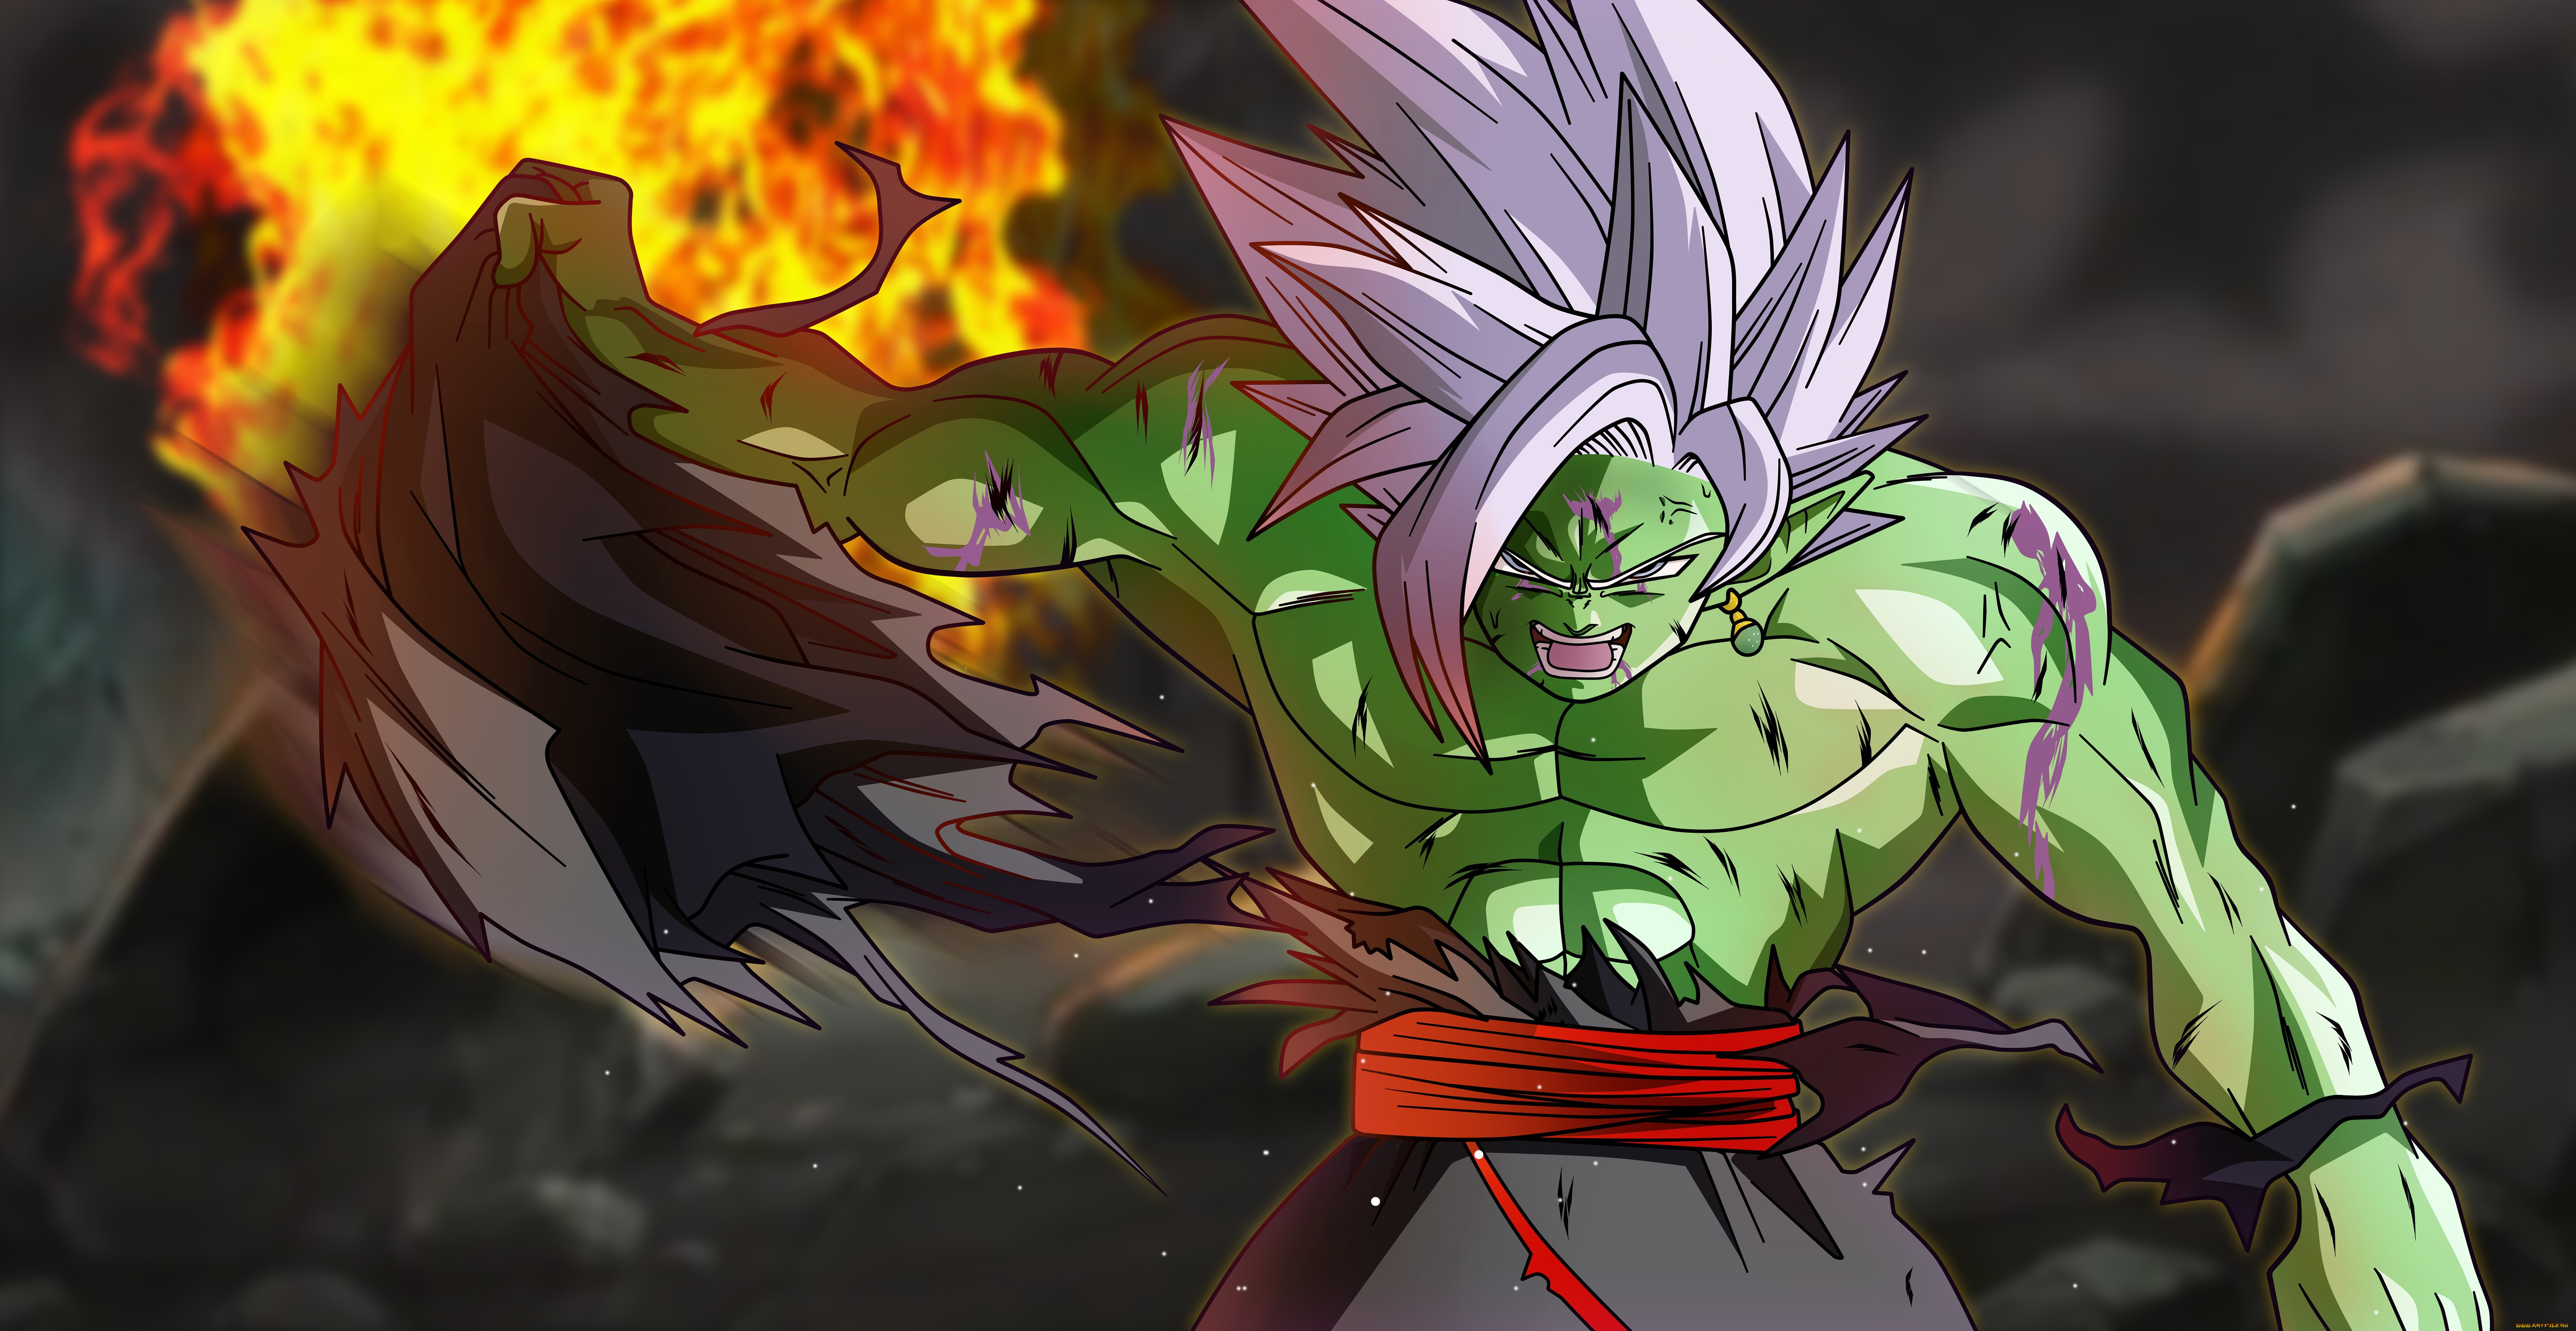 , dragon ball, fight, dragon, ball, z, muscular, oriental, japanese, fire, asiatic, chest, manga, asian, flame, thorax, anime, spark